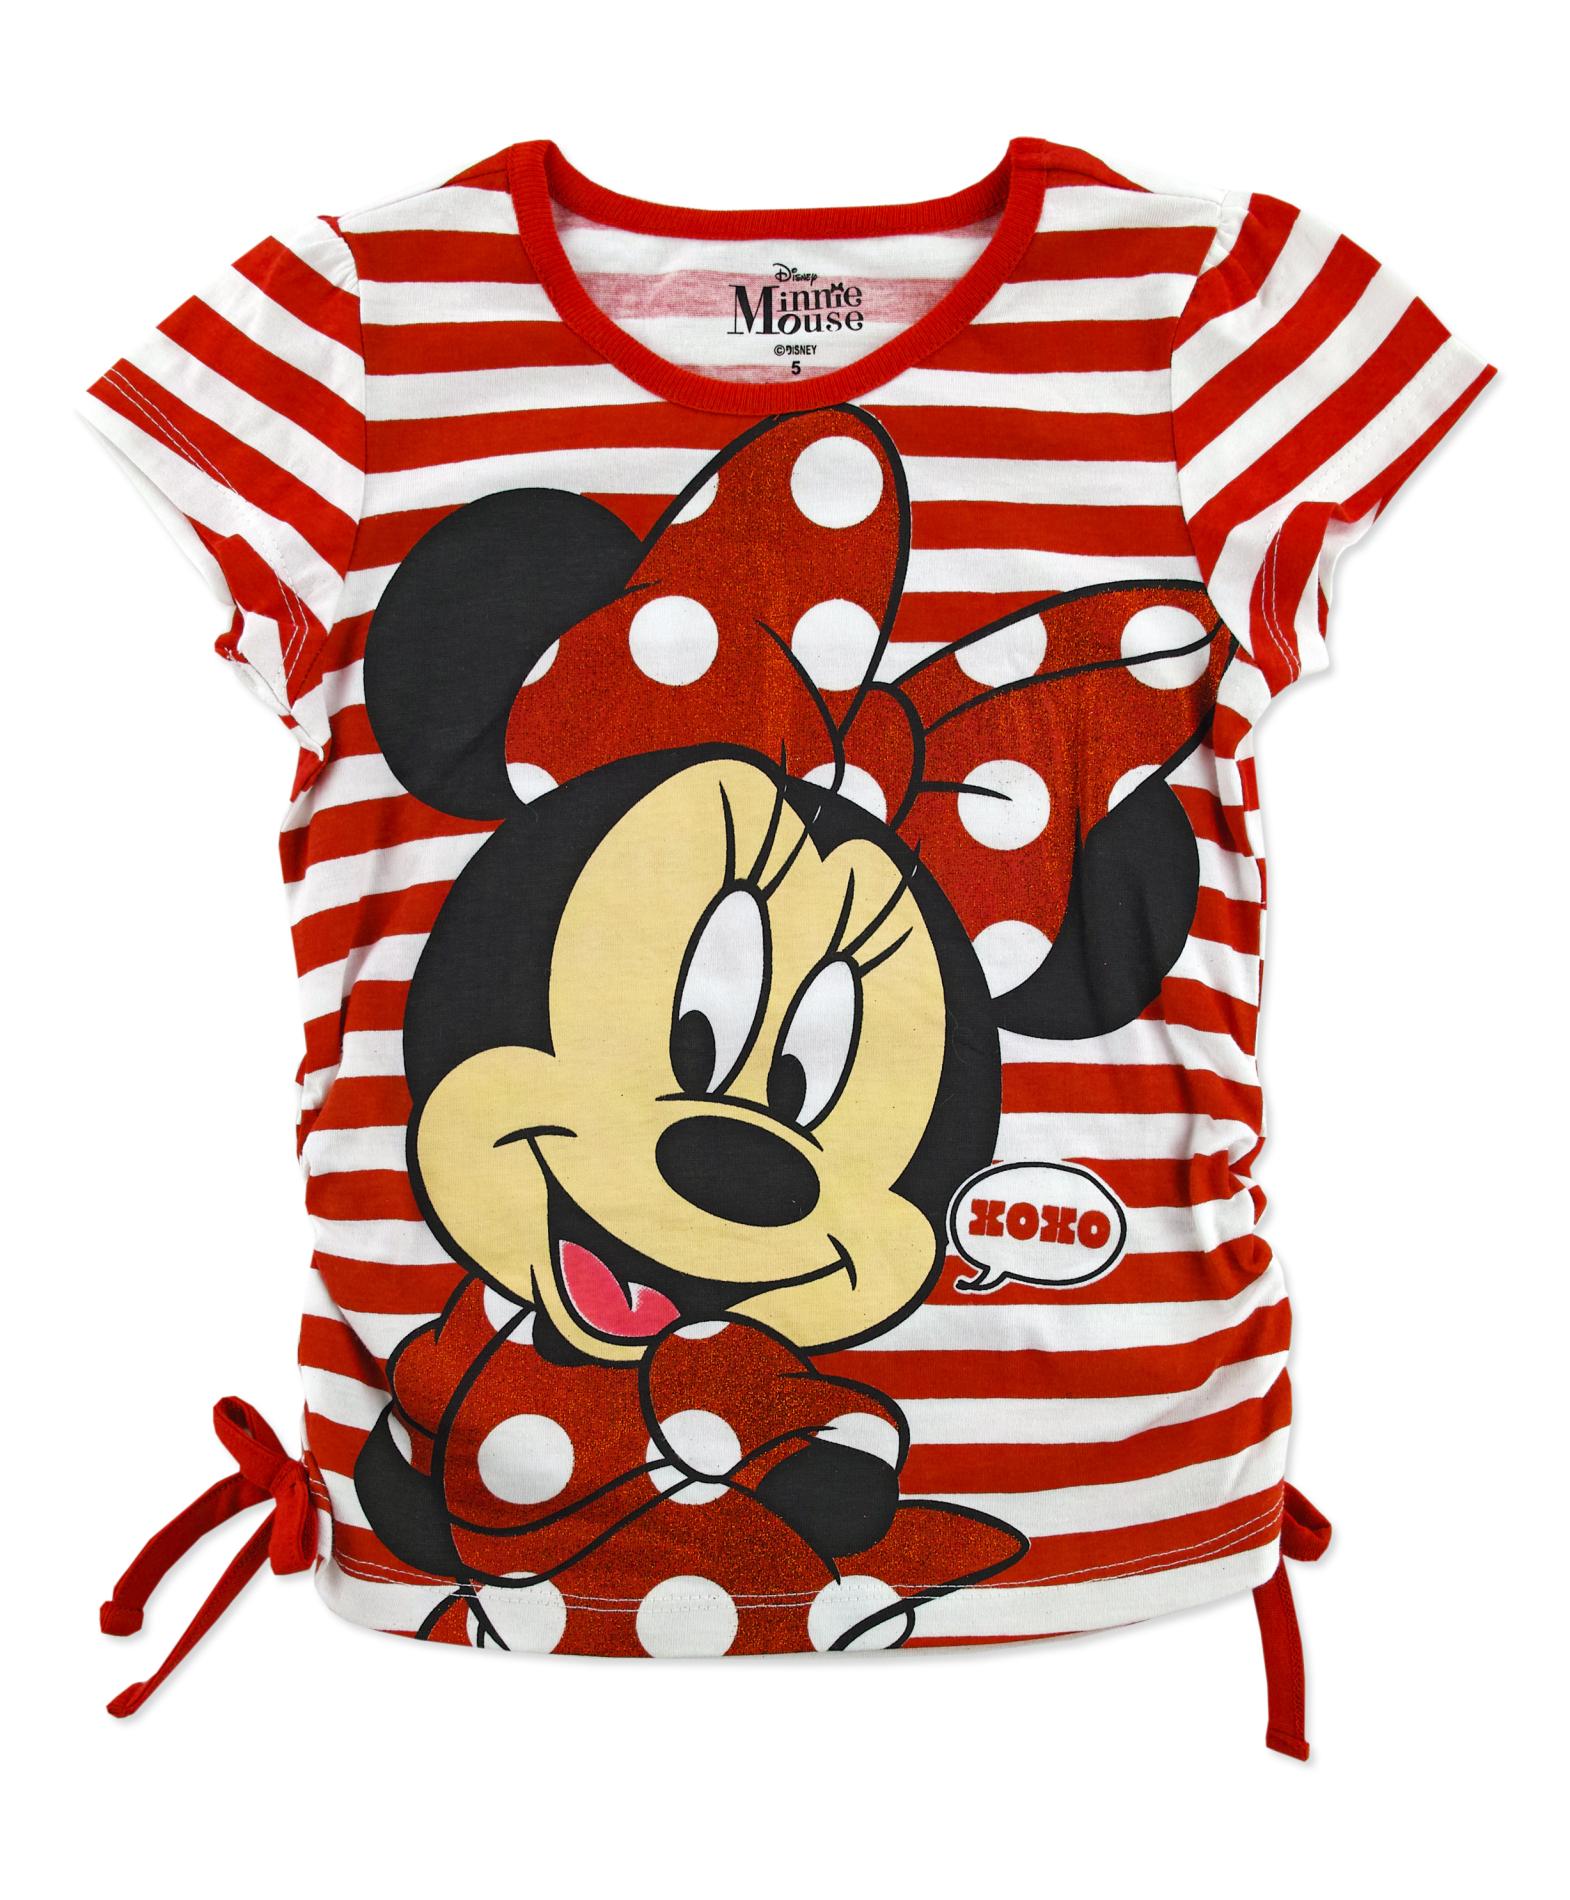 Disney Minnie Mouse Girl's T-Shirt - Striped